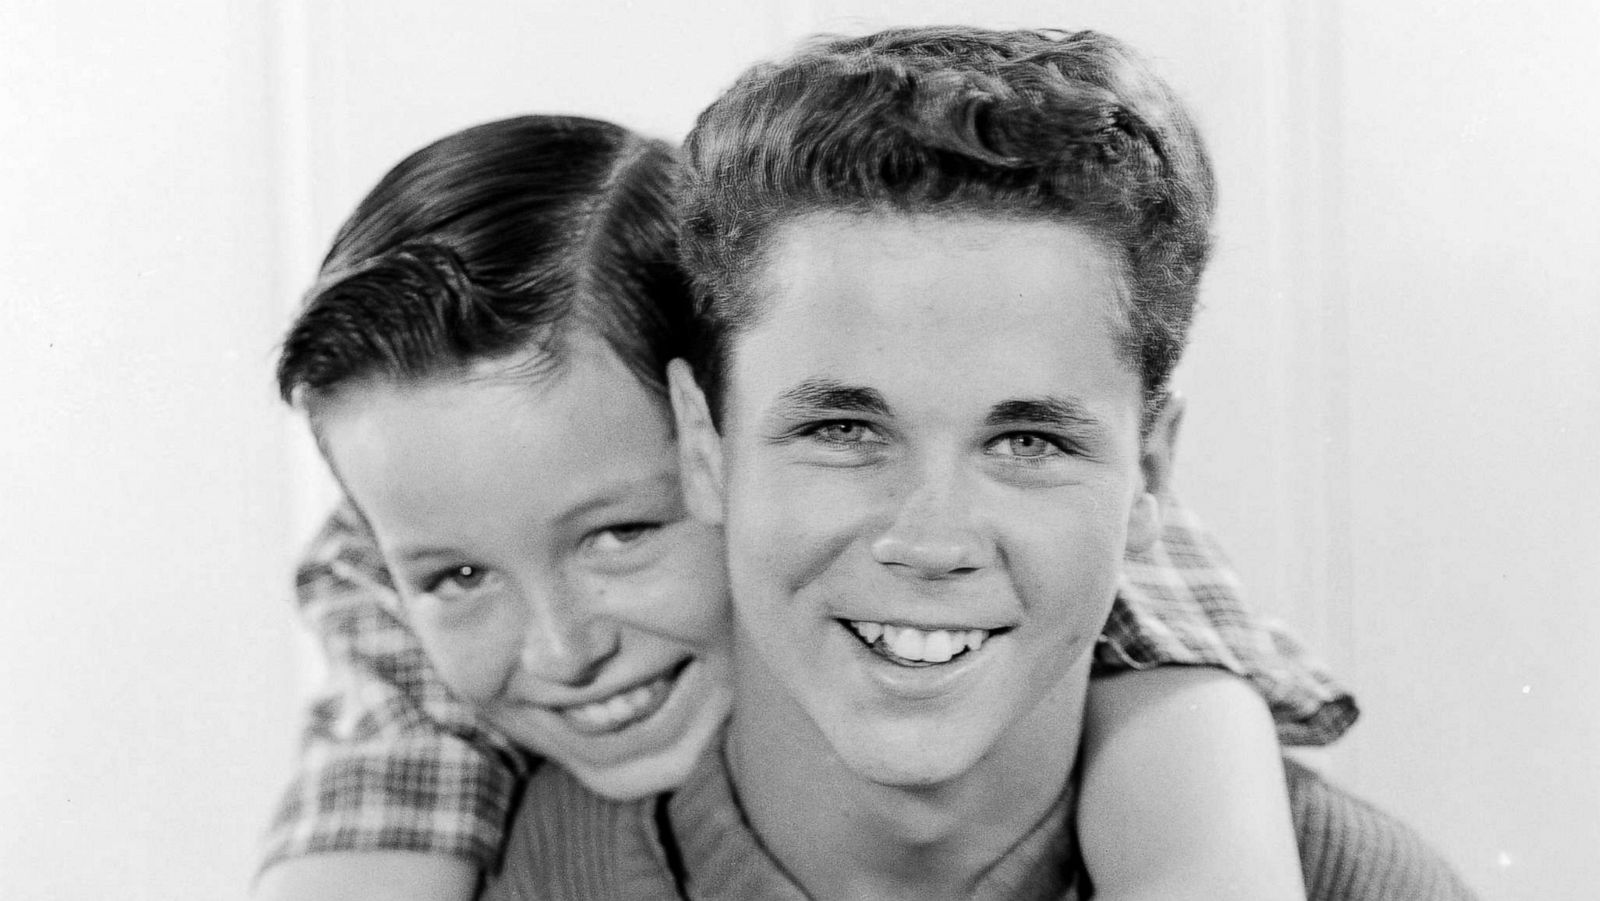 Leave it to Beaver star Tony Dow dies at 77